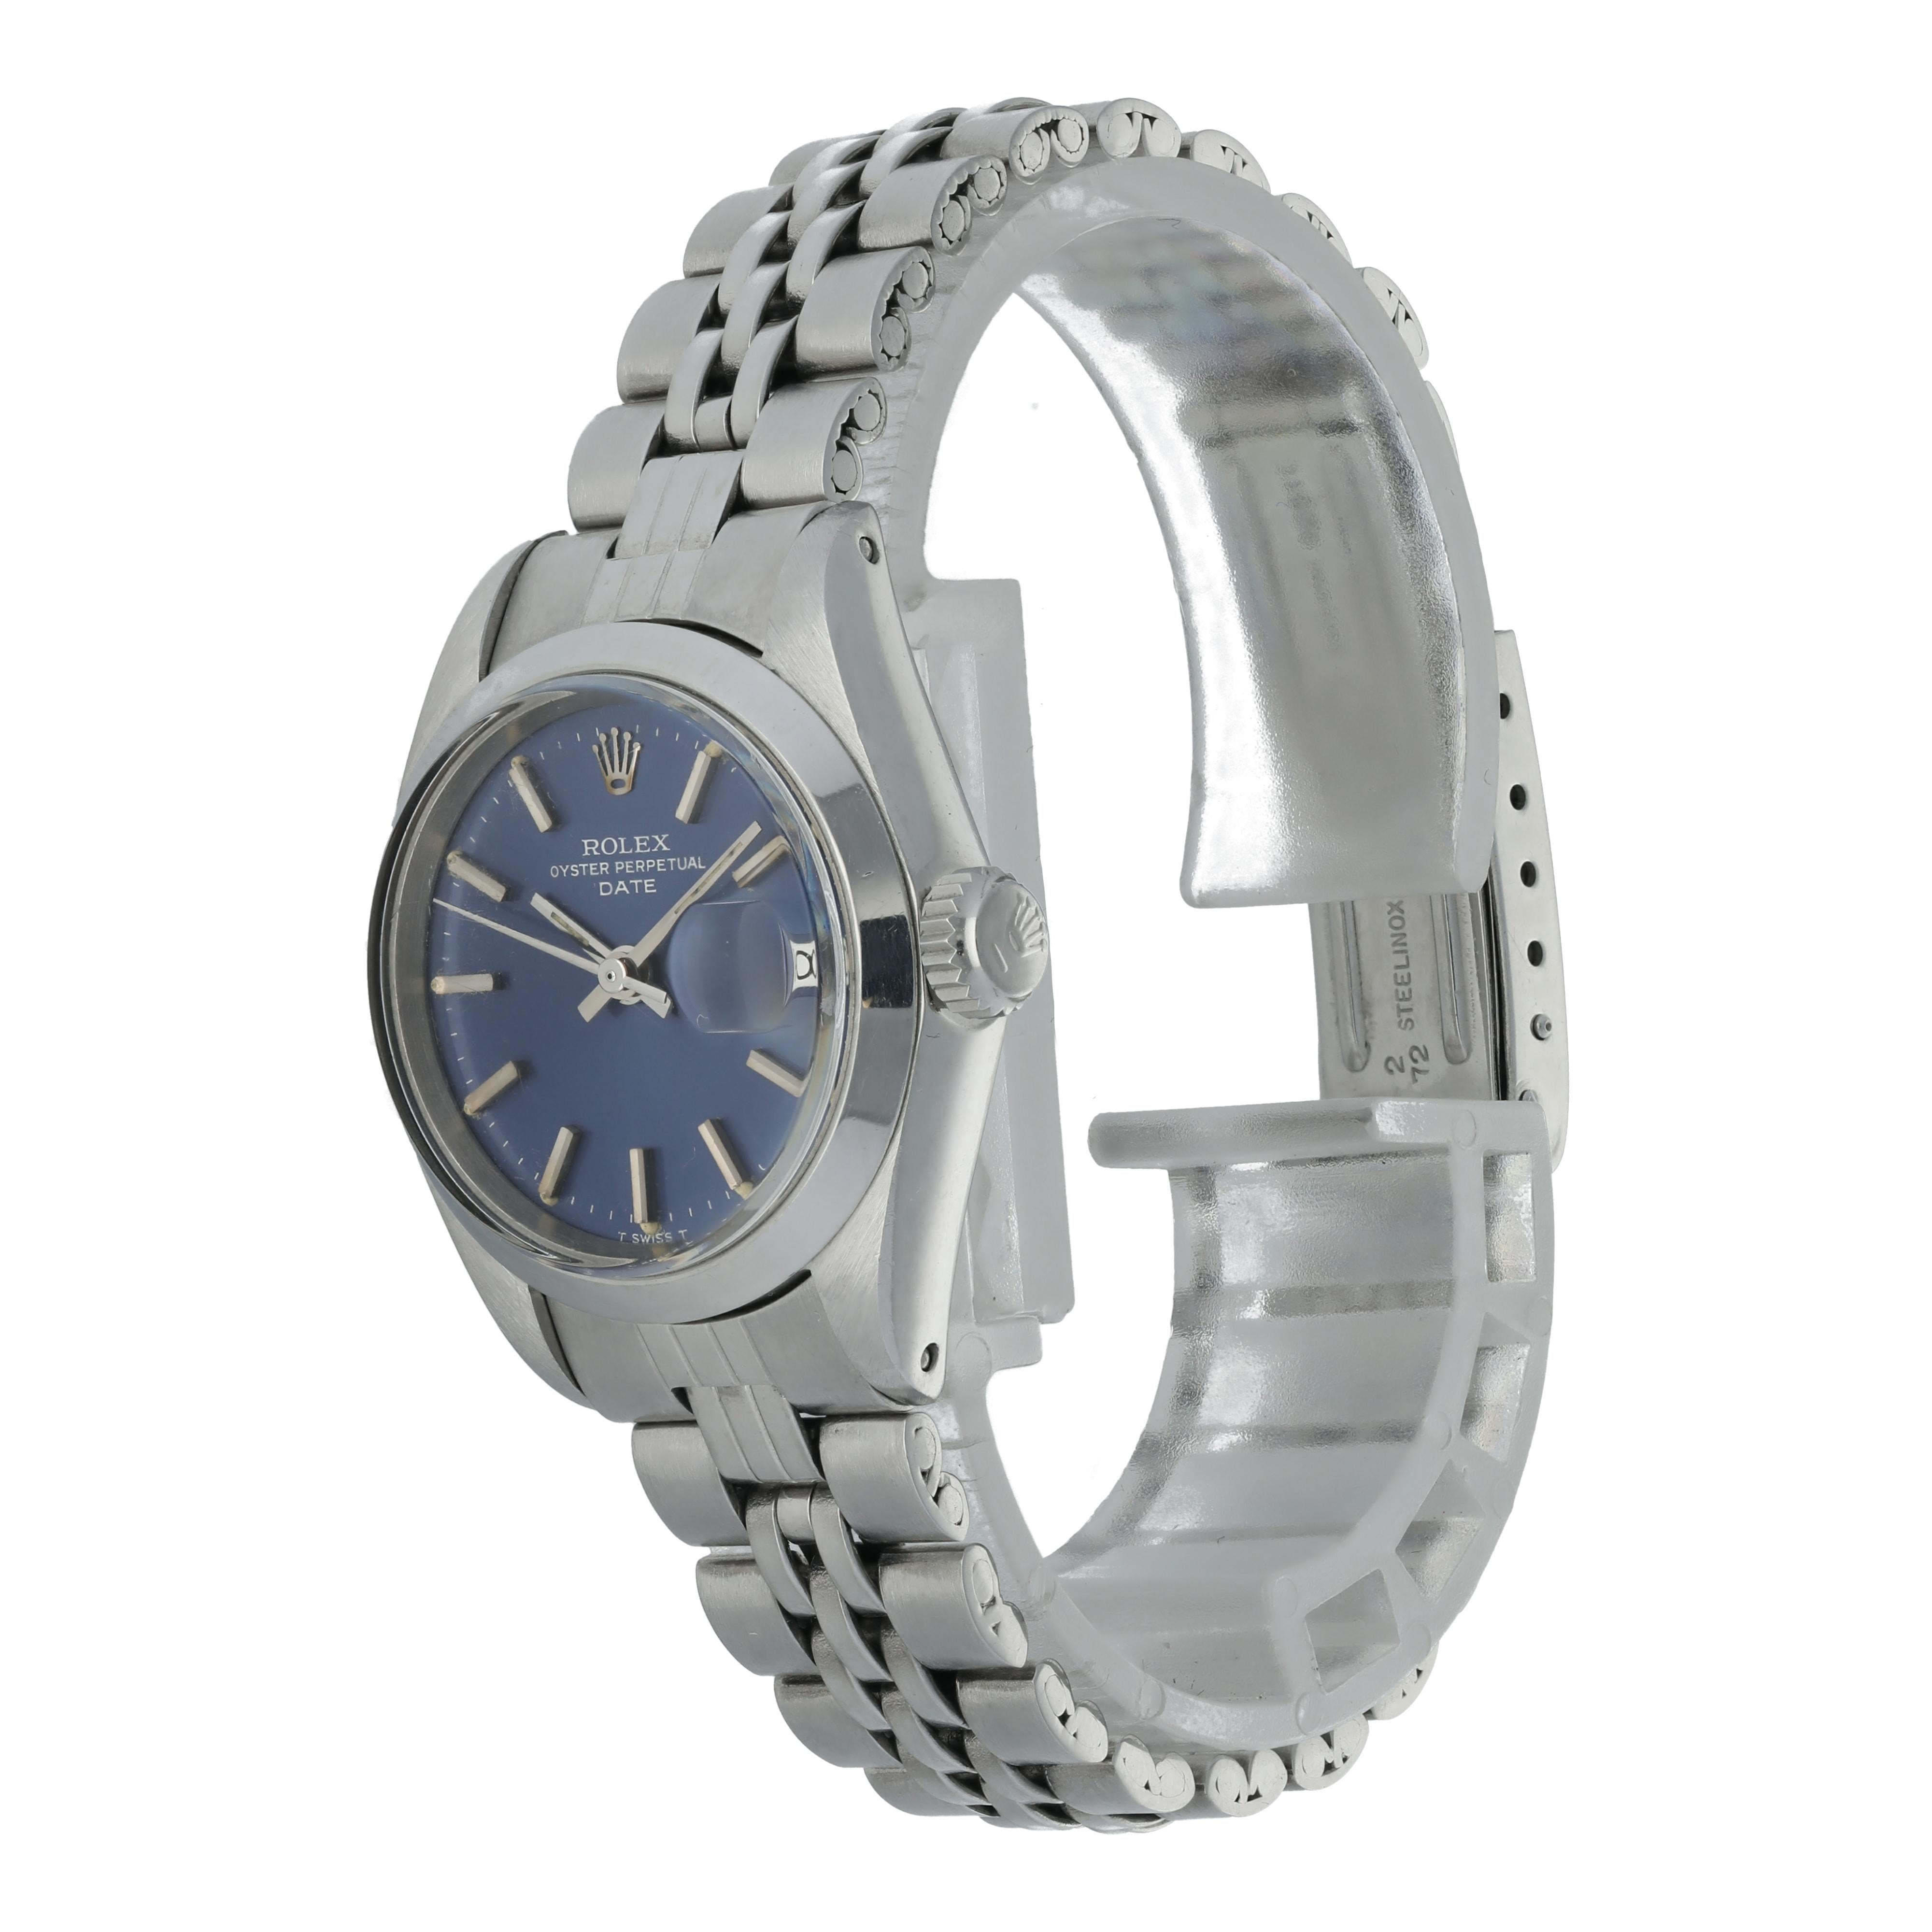 Rolex Oyster Perpetual Date 6916 Ladies Watch.
26mm Stainless Steel case. 
Stainless Steel Stationary bezel. 
Blue dial with steel hands and index hour markers. 
Minute markers on the outer dial. 
Date display at the 3 o'clock position. 
Stainless